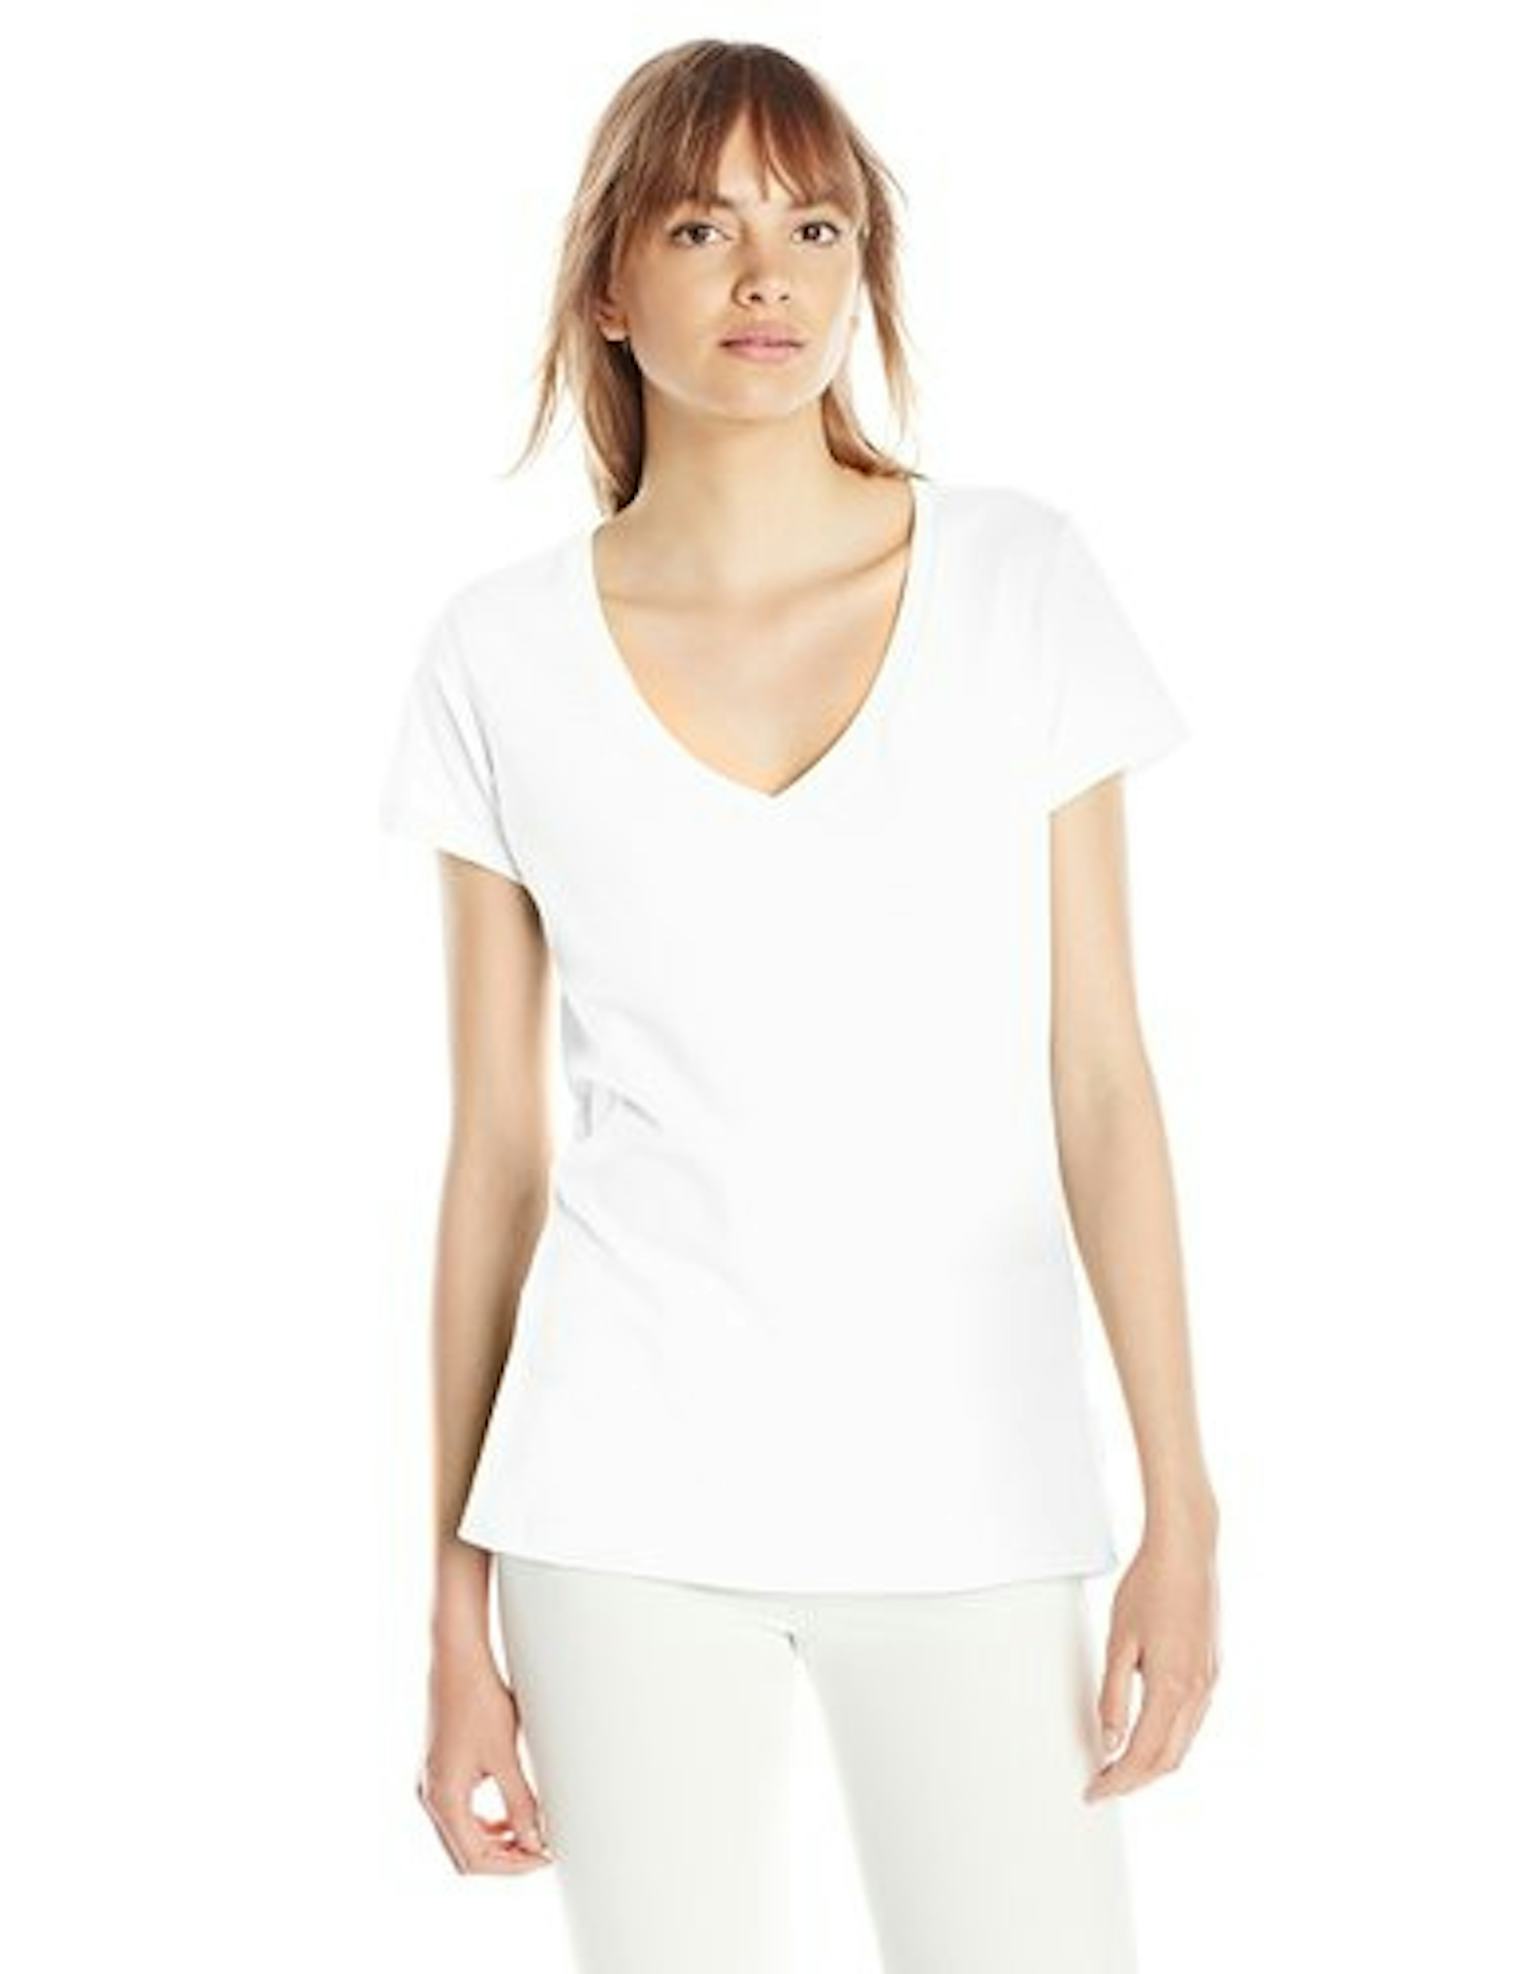 12 Highly Reviewed White T-Shirts That Are Actually Stylish